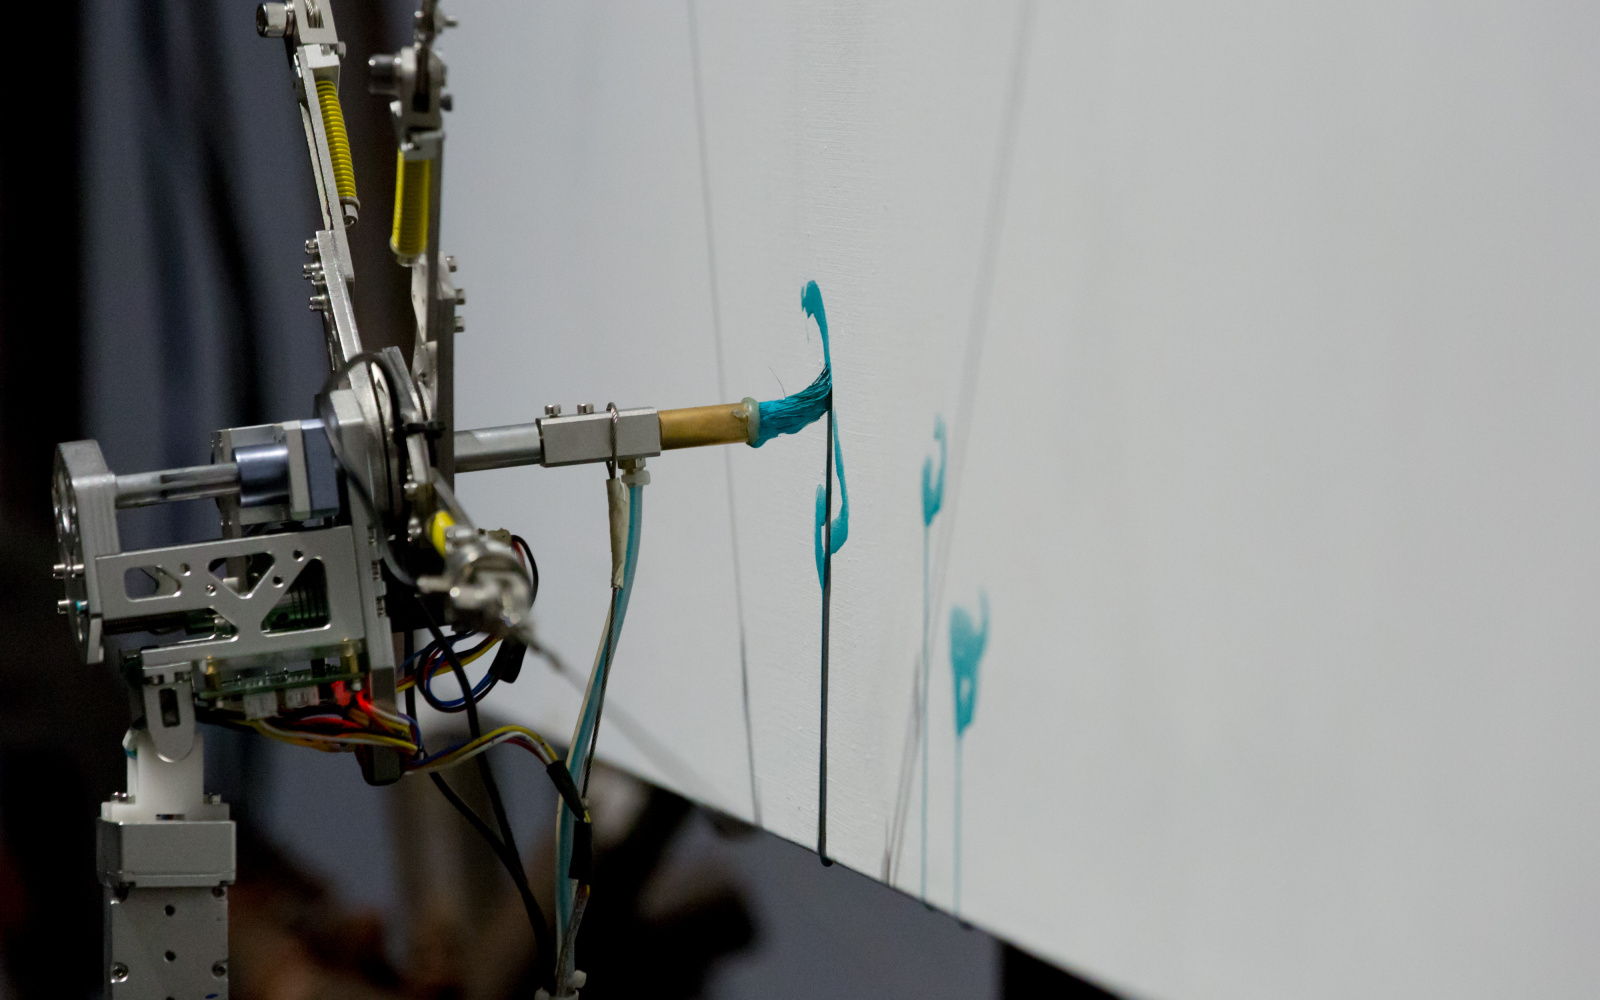  The picture shows a robot-controlled brush, drawing turquoise color on a white canvas.